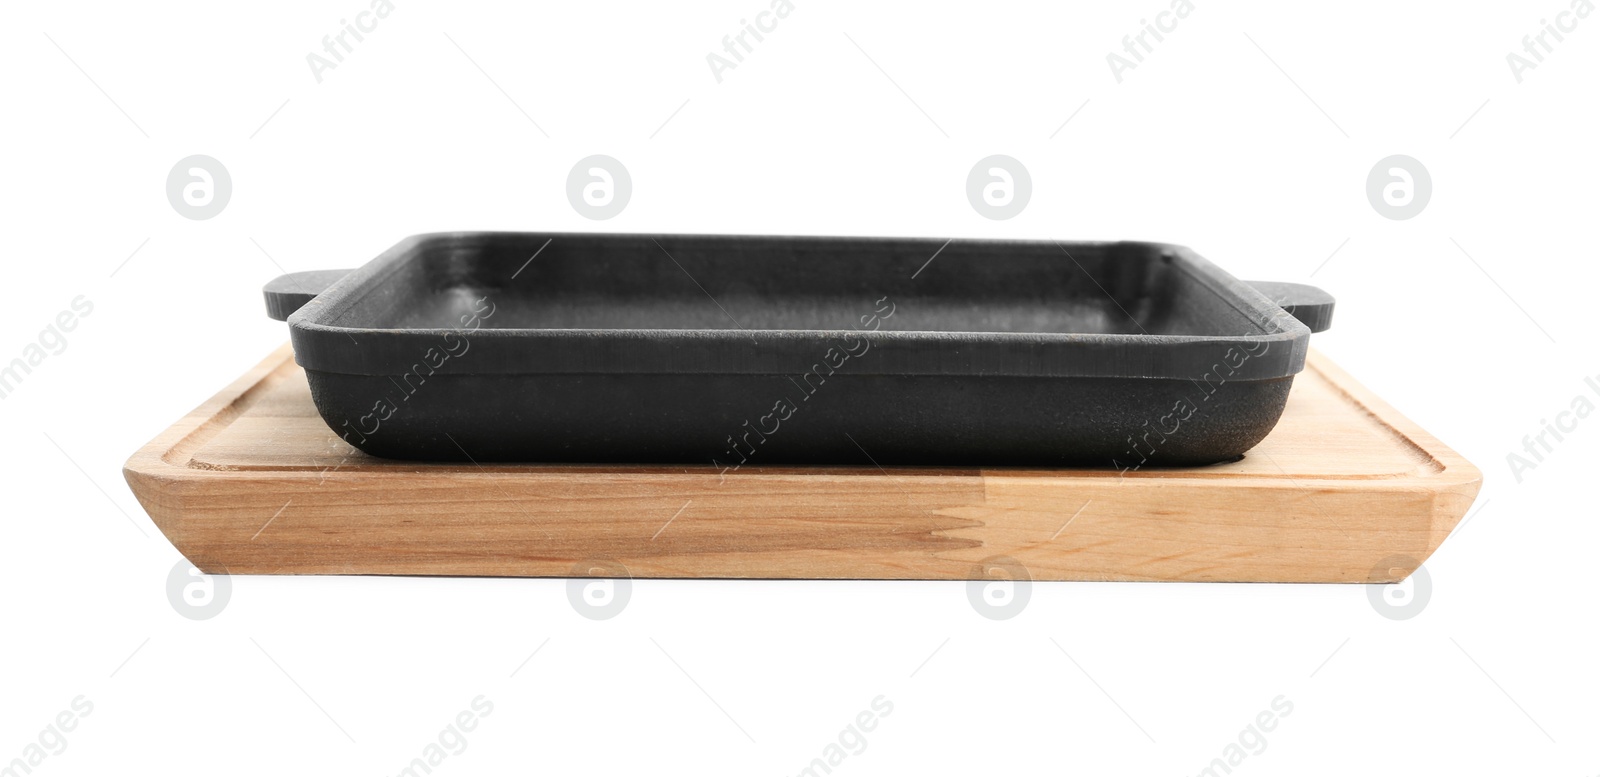 Photo of Baking dish and wooden board isolated on white. Cooking utensils